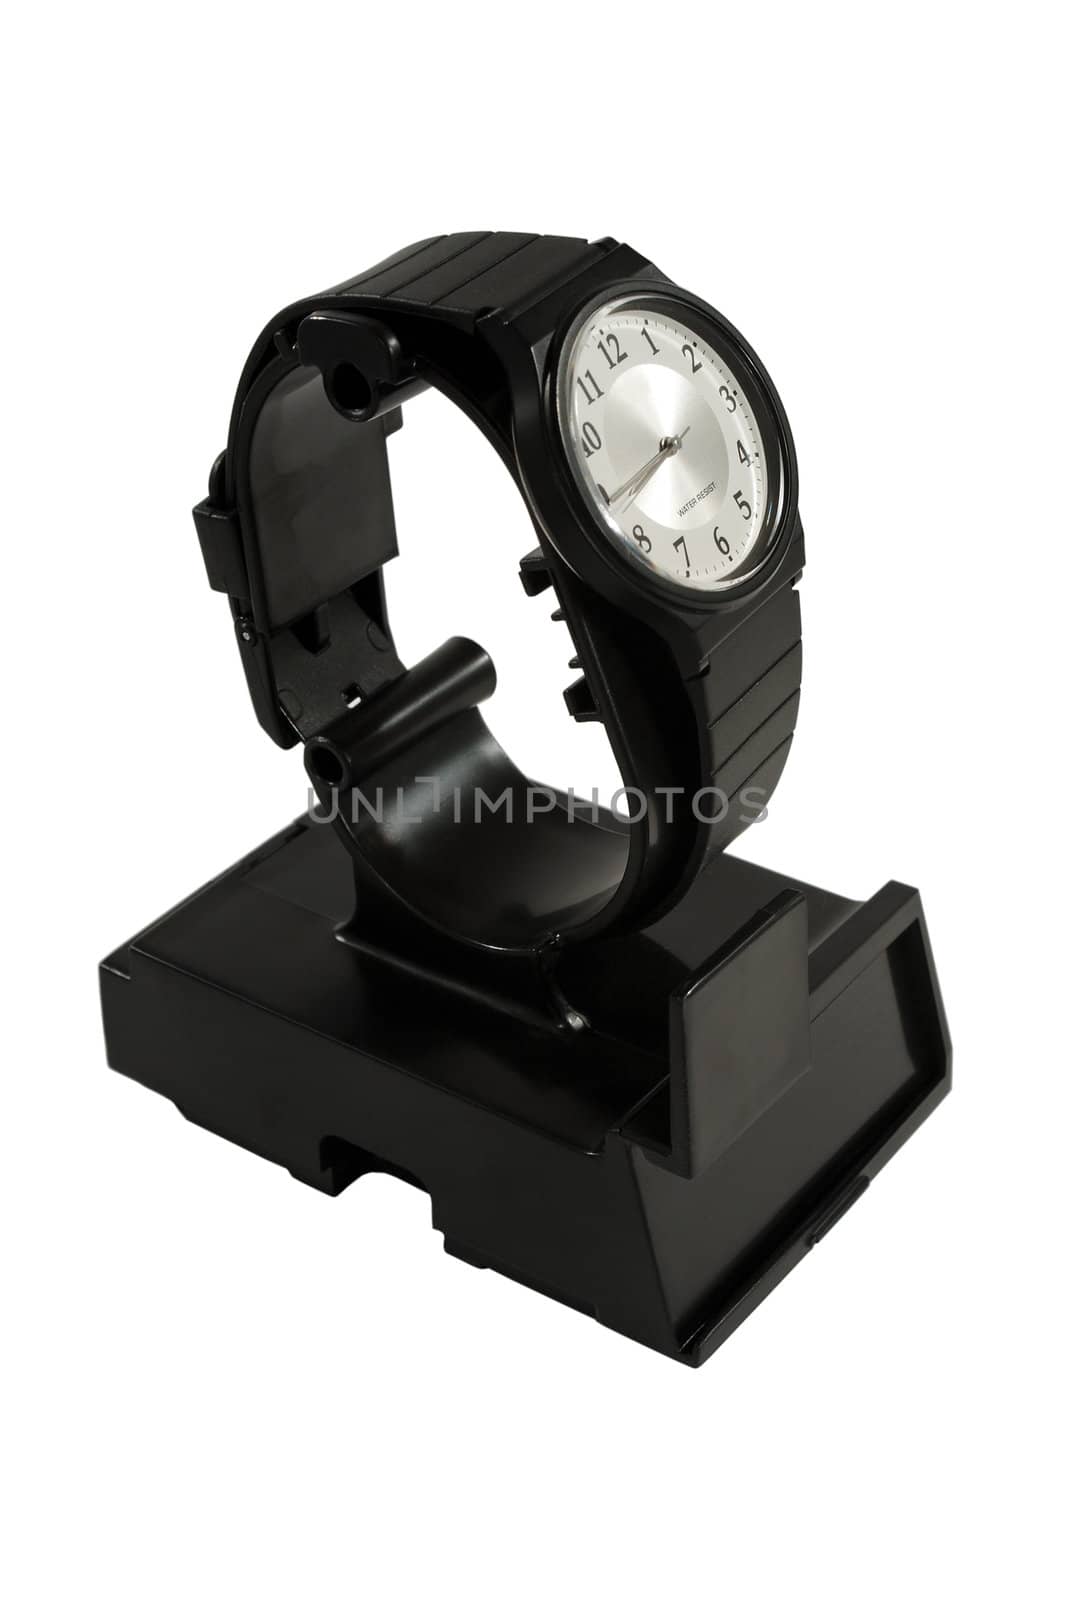 Gents Black Wristwatch On Stand, mounted for display isolated on white.